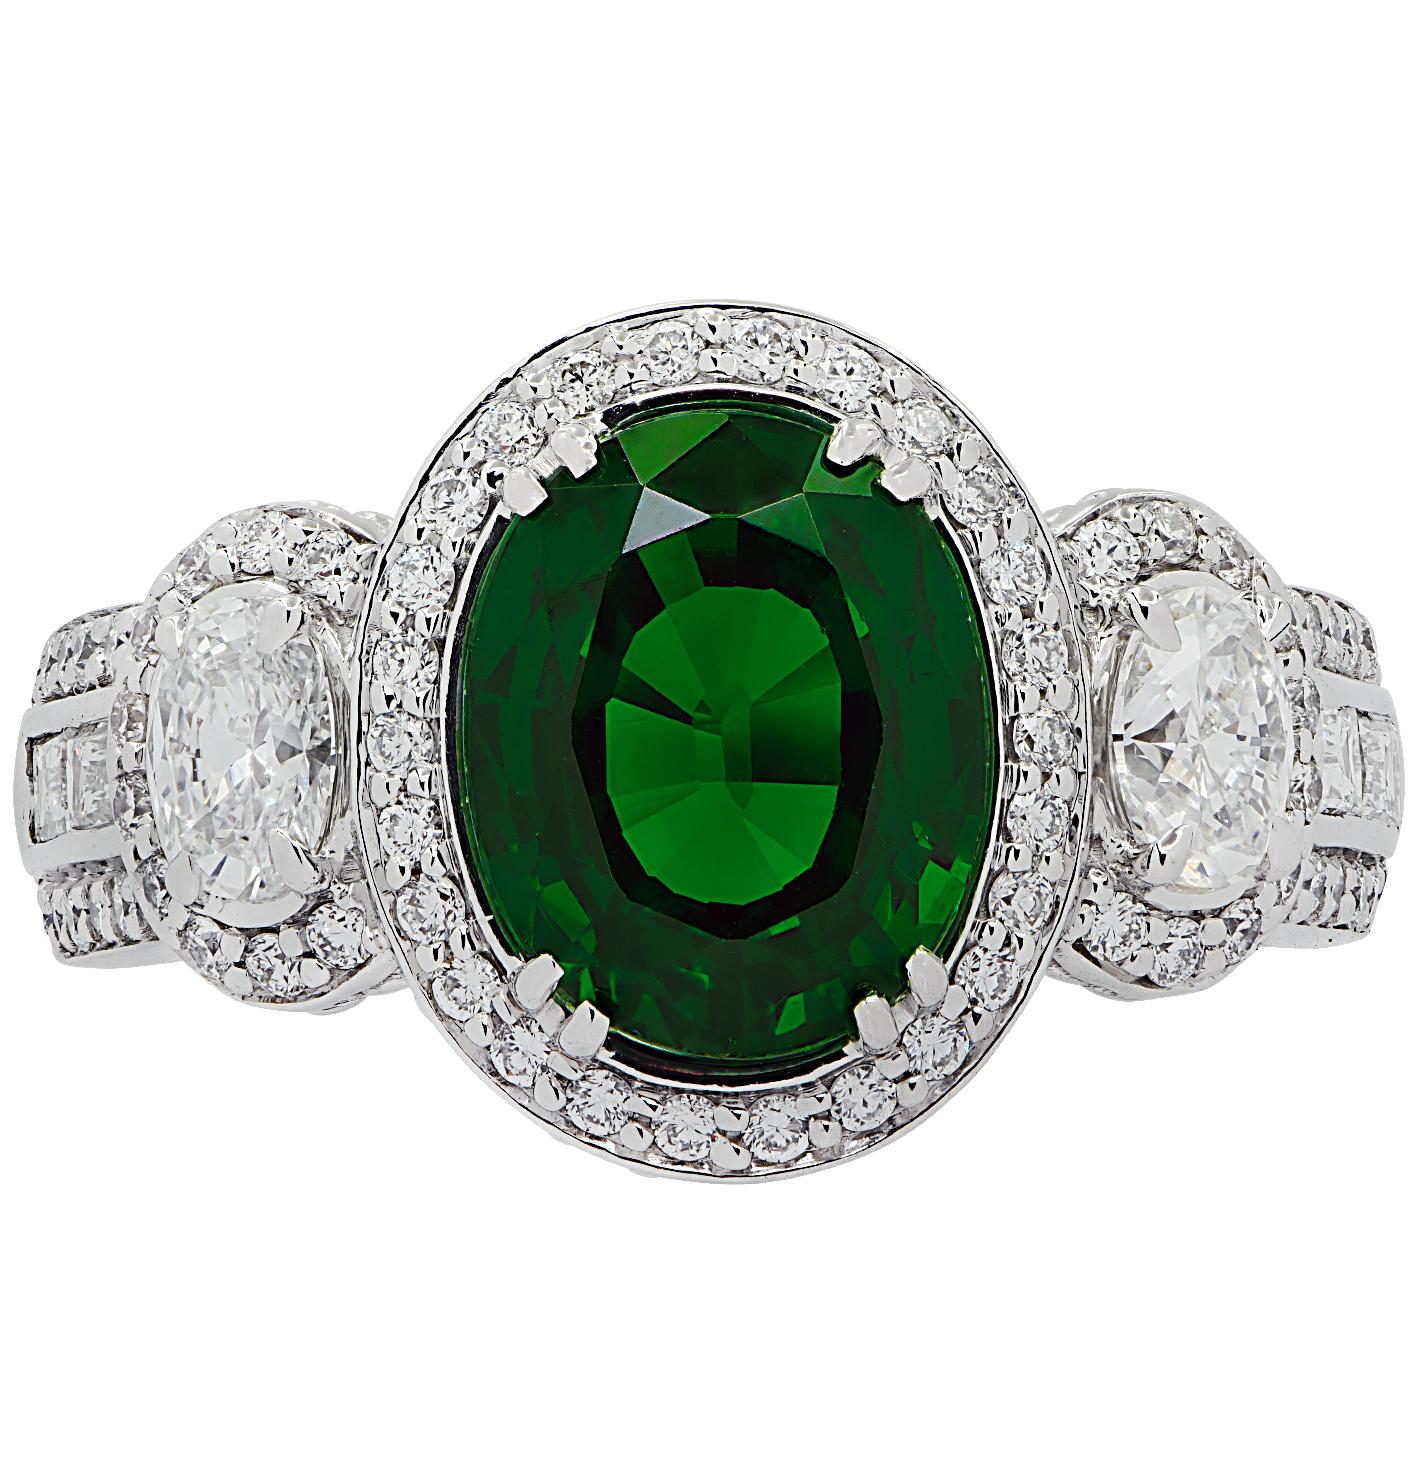 Spectacular Vivid Diamonds ring crafted in 18 karat white gold showcasing a stunning rich green oval cut Tsavorite weighing 3.38 carats, accented by two round oval cut diamonds weighing approximately .40 carats total, G color, VS clarity, and 84